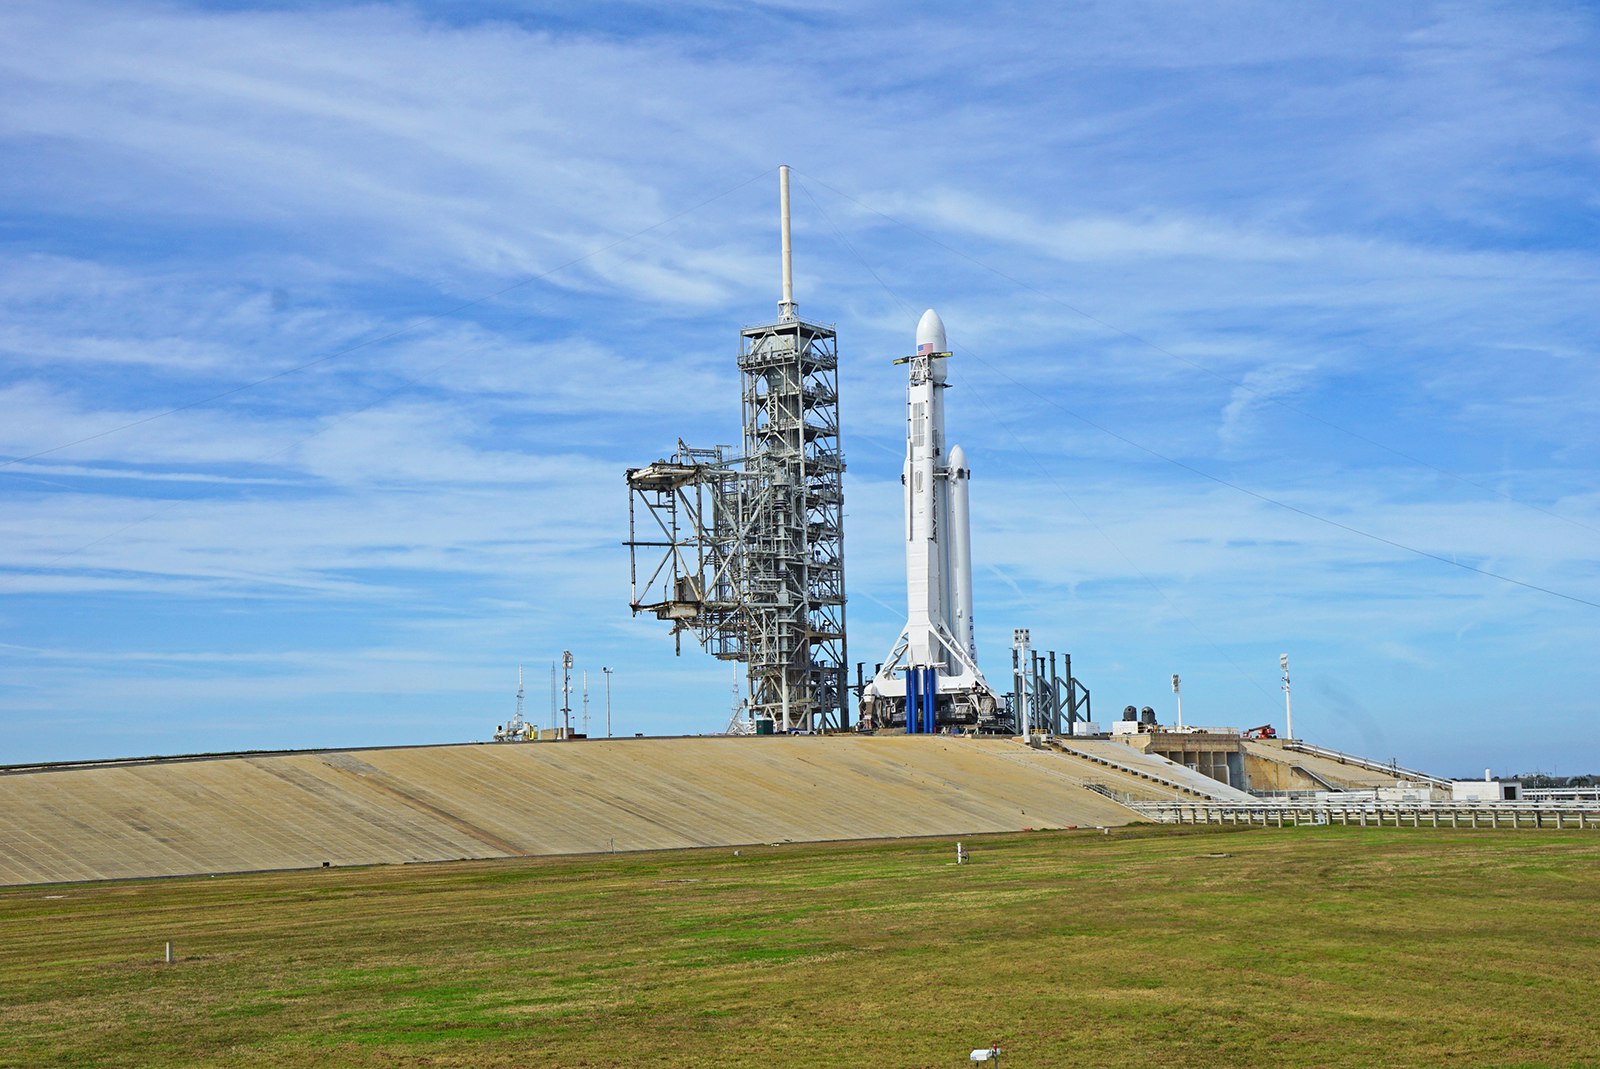 spacex shuttle on the launchpad in Florida, with sunny blue skies; how to experience a rocket launch on Florida's Space Coast